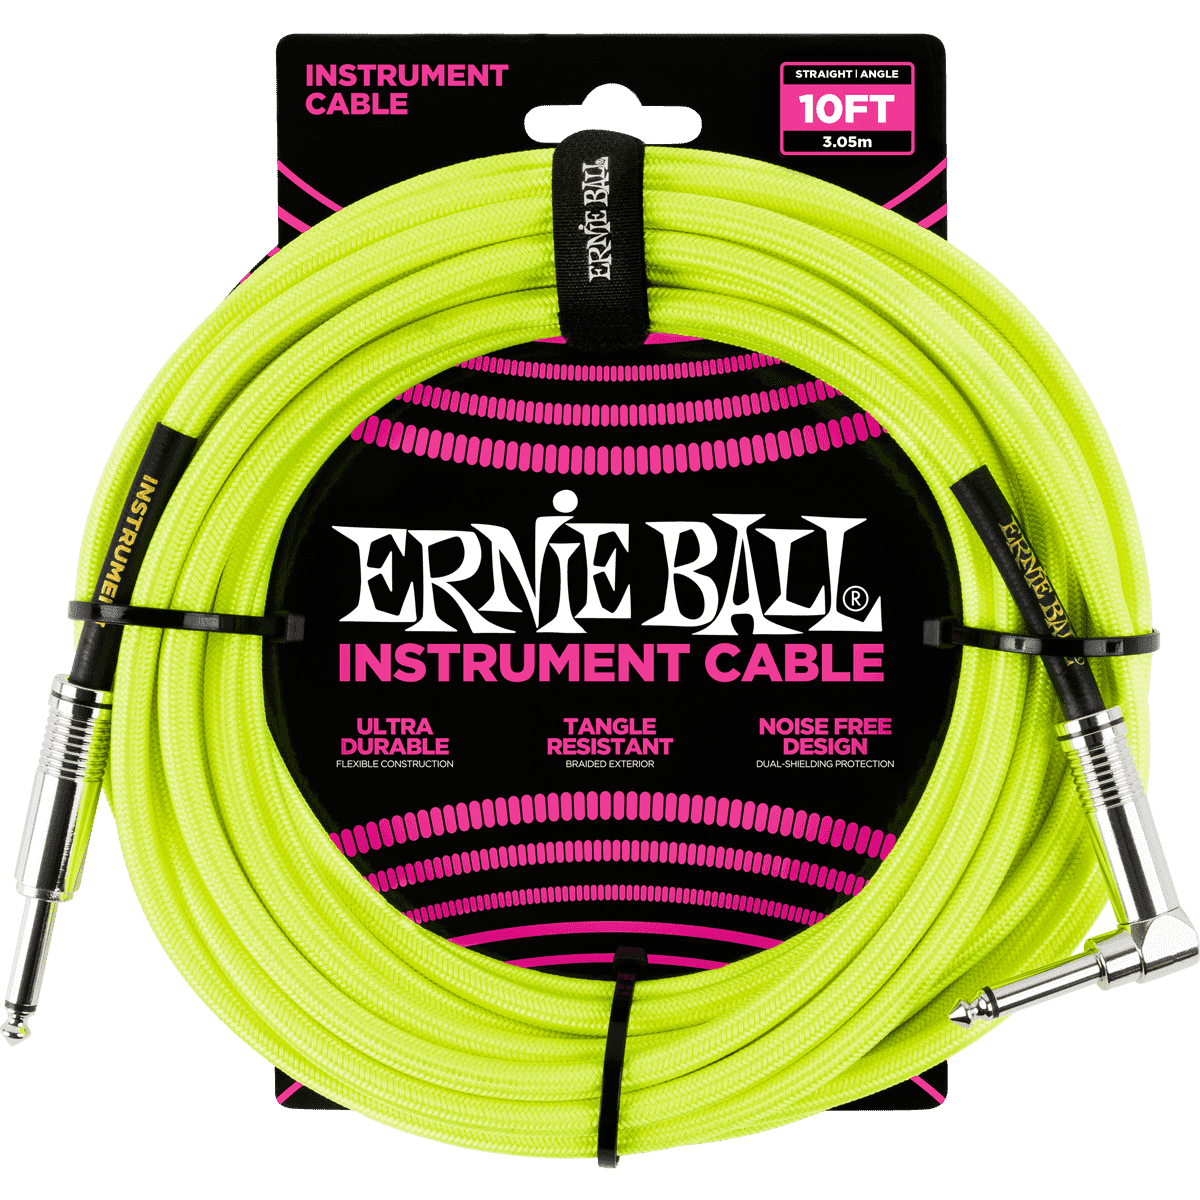 Ernie Ball 6080 Instrument Cable Yellow Woven | 3 meters